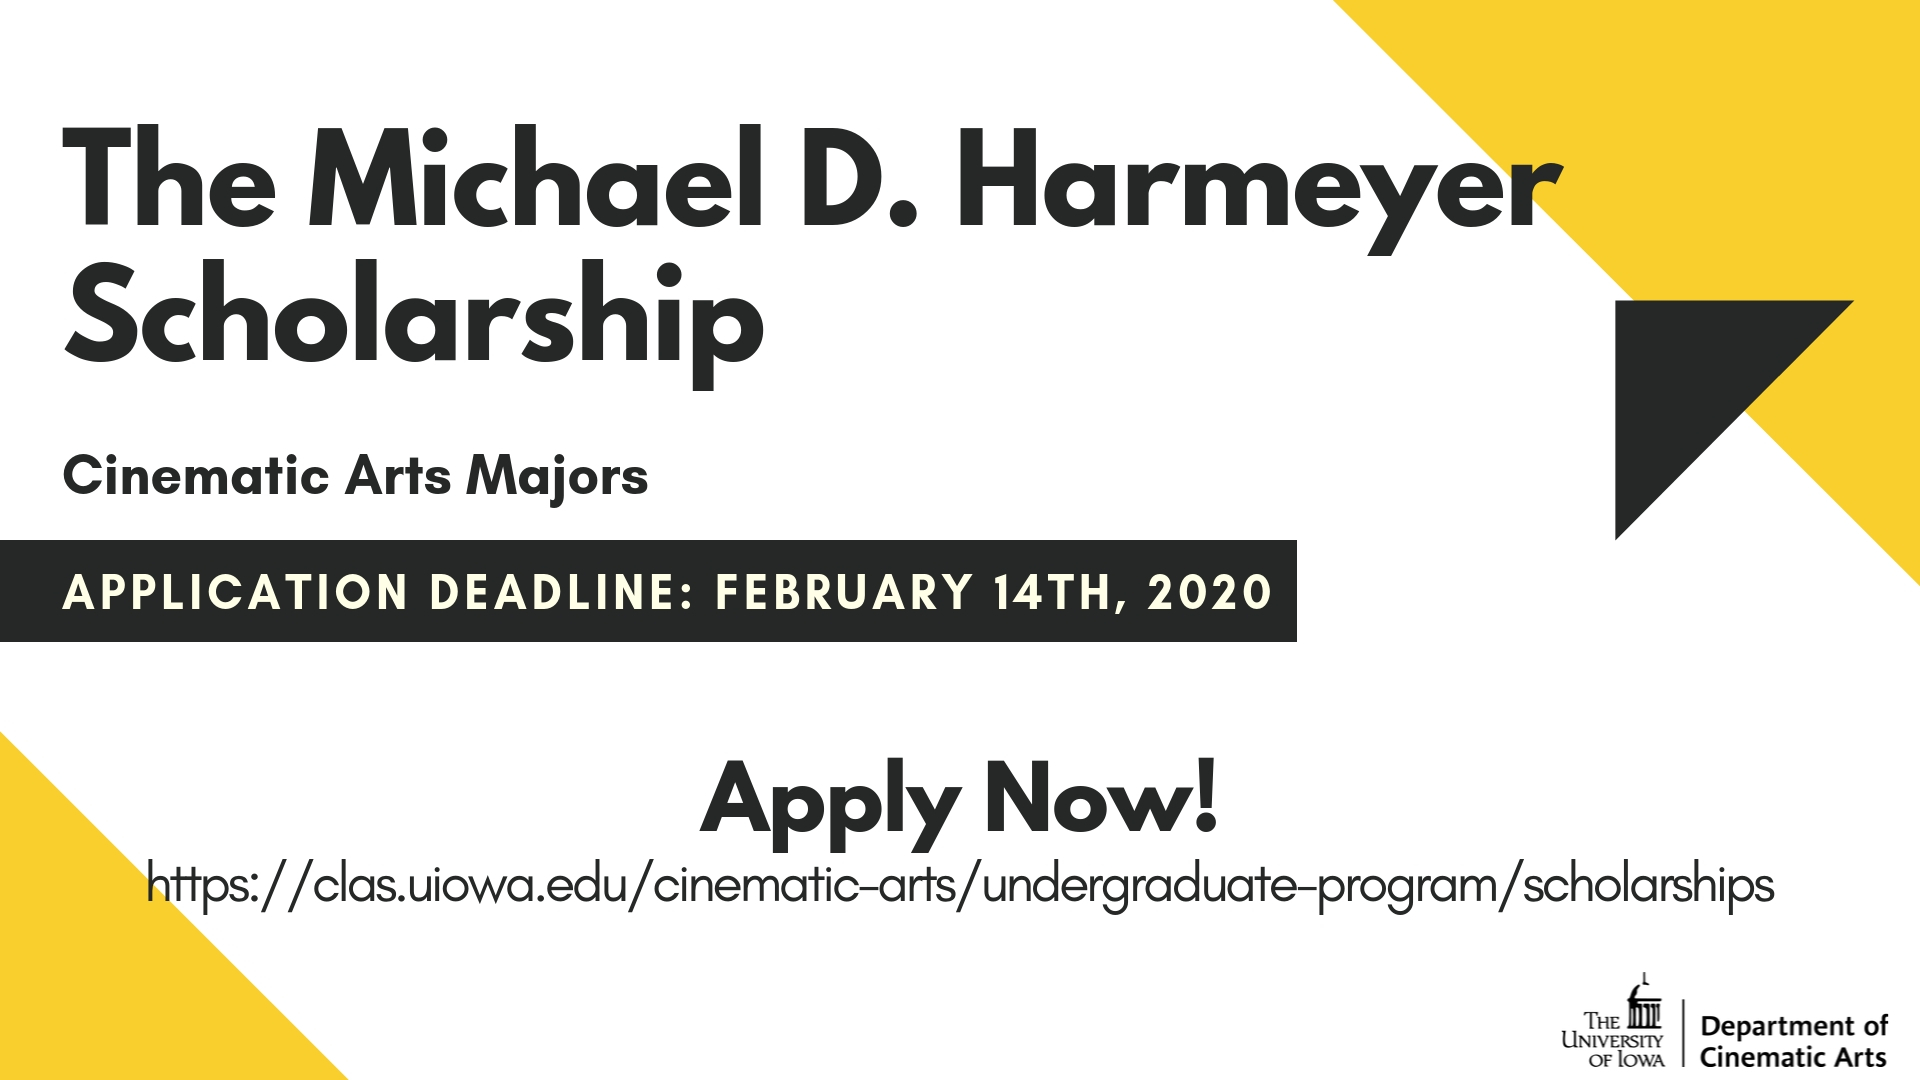 Michael D. Harmeyer Scholarship for Cinematic Arts Majors, apply by February 14, 2020